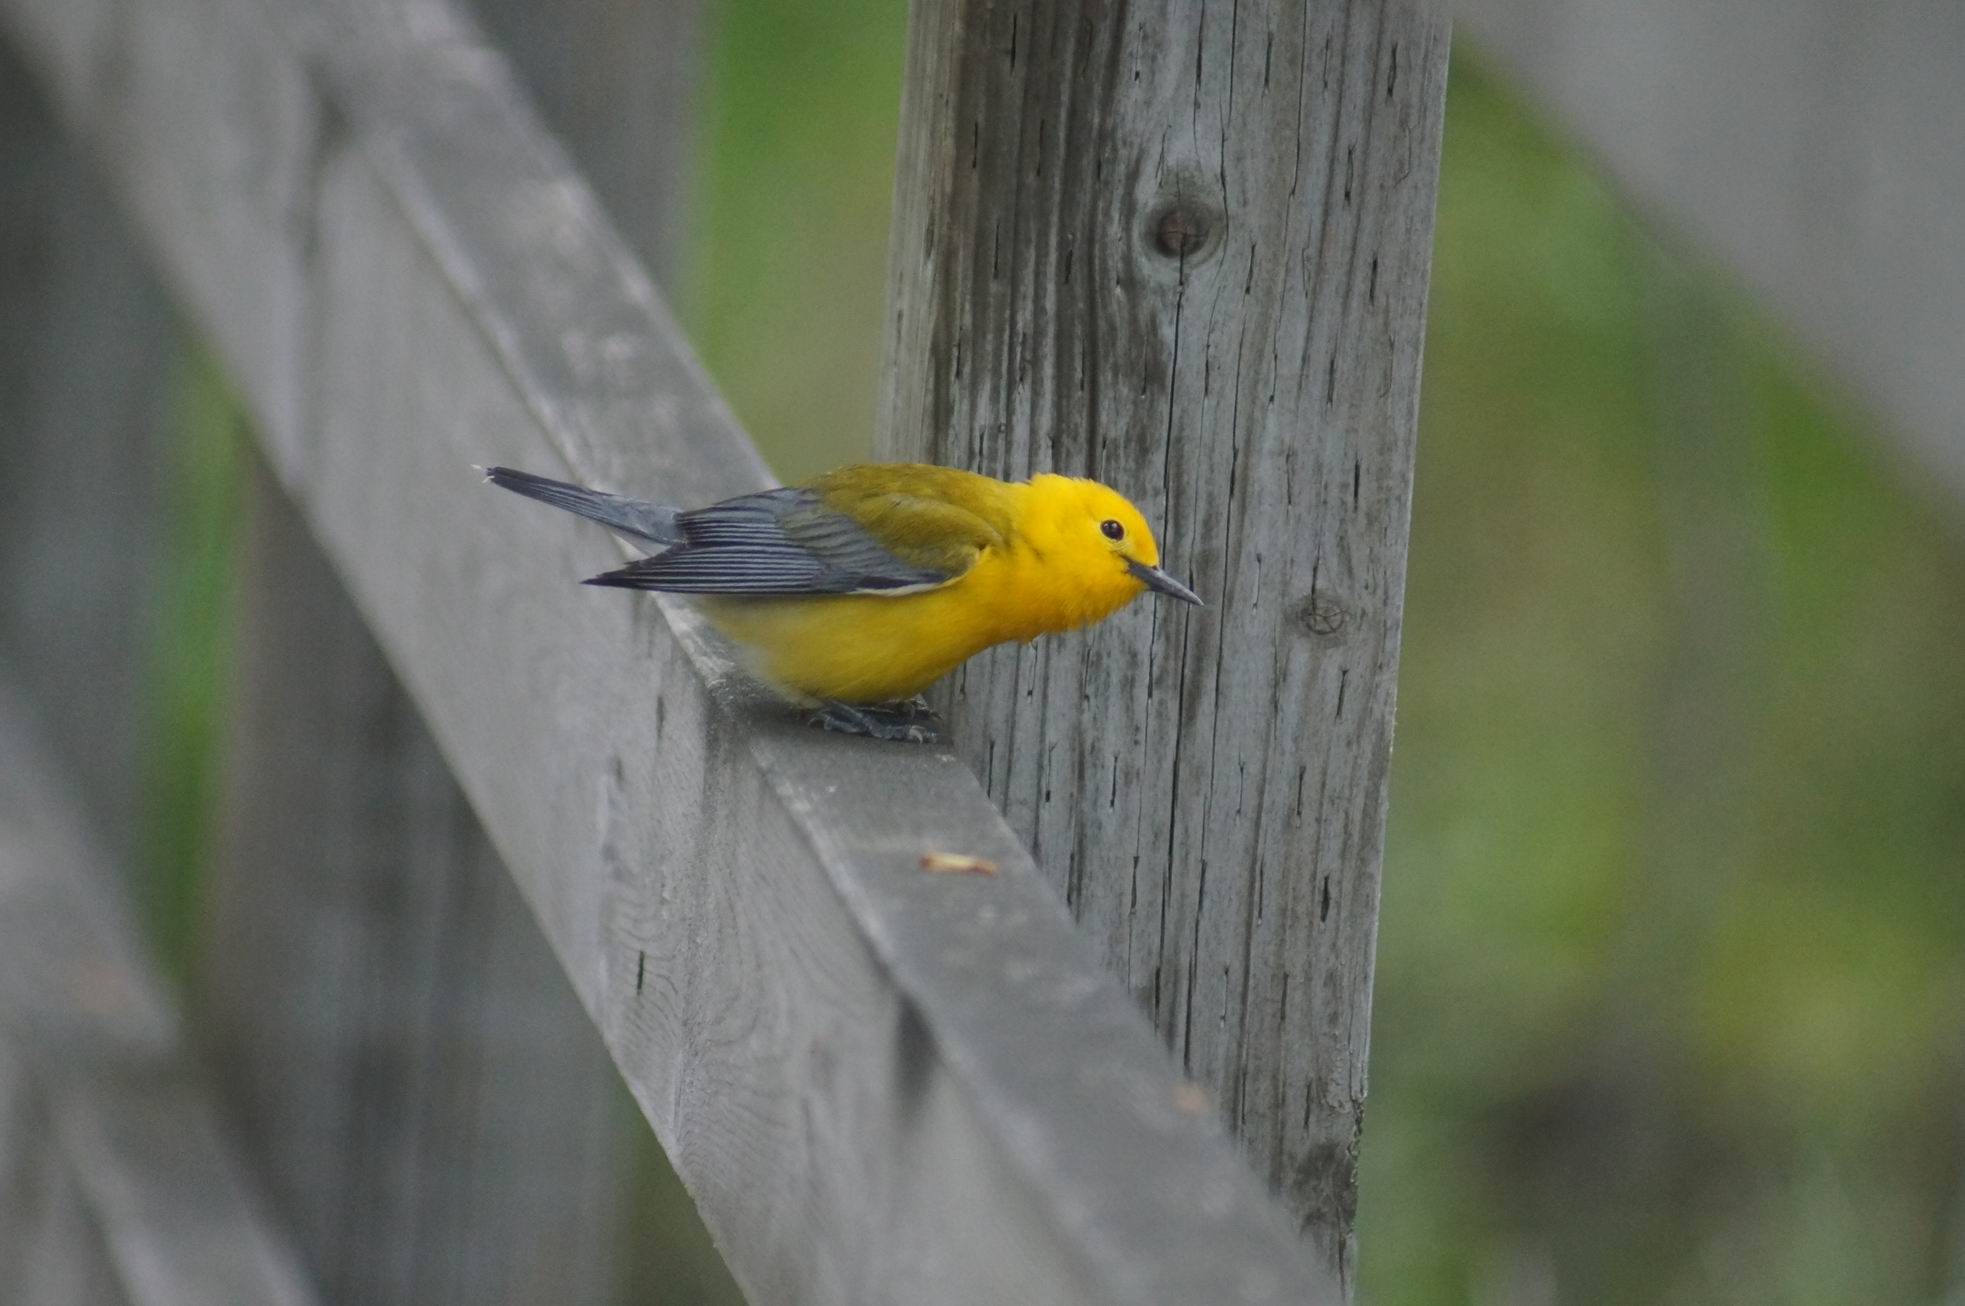  Prothonotary Warbler, Rondeau, May 2018